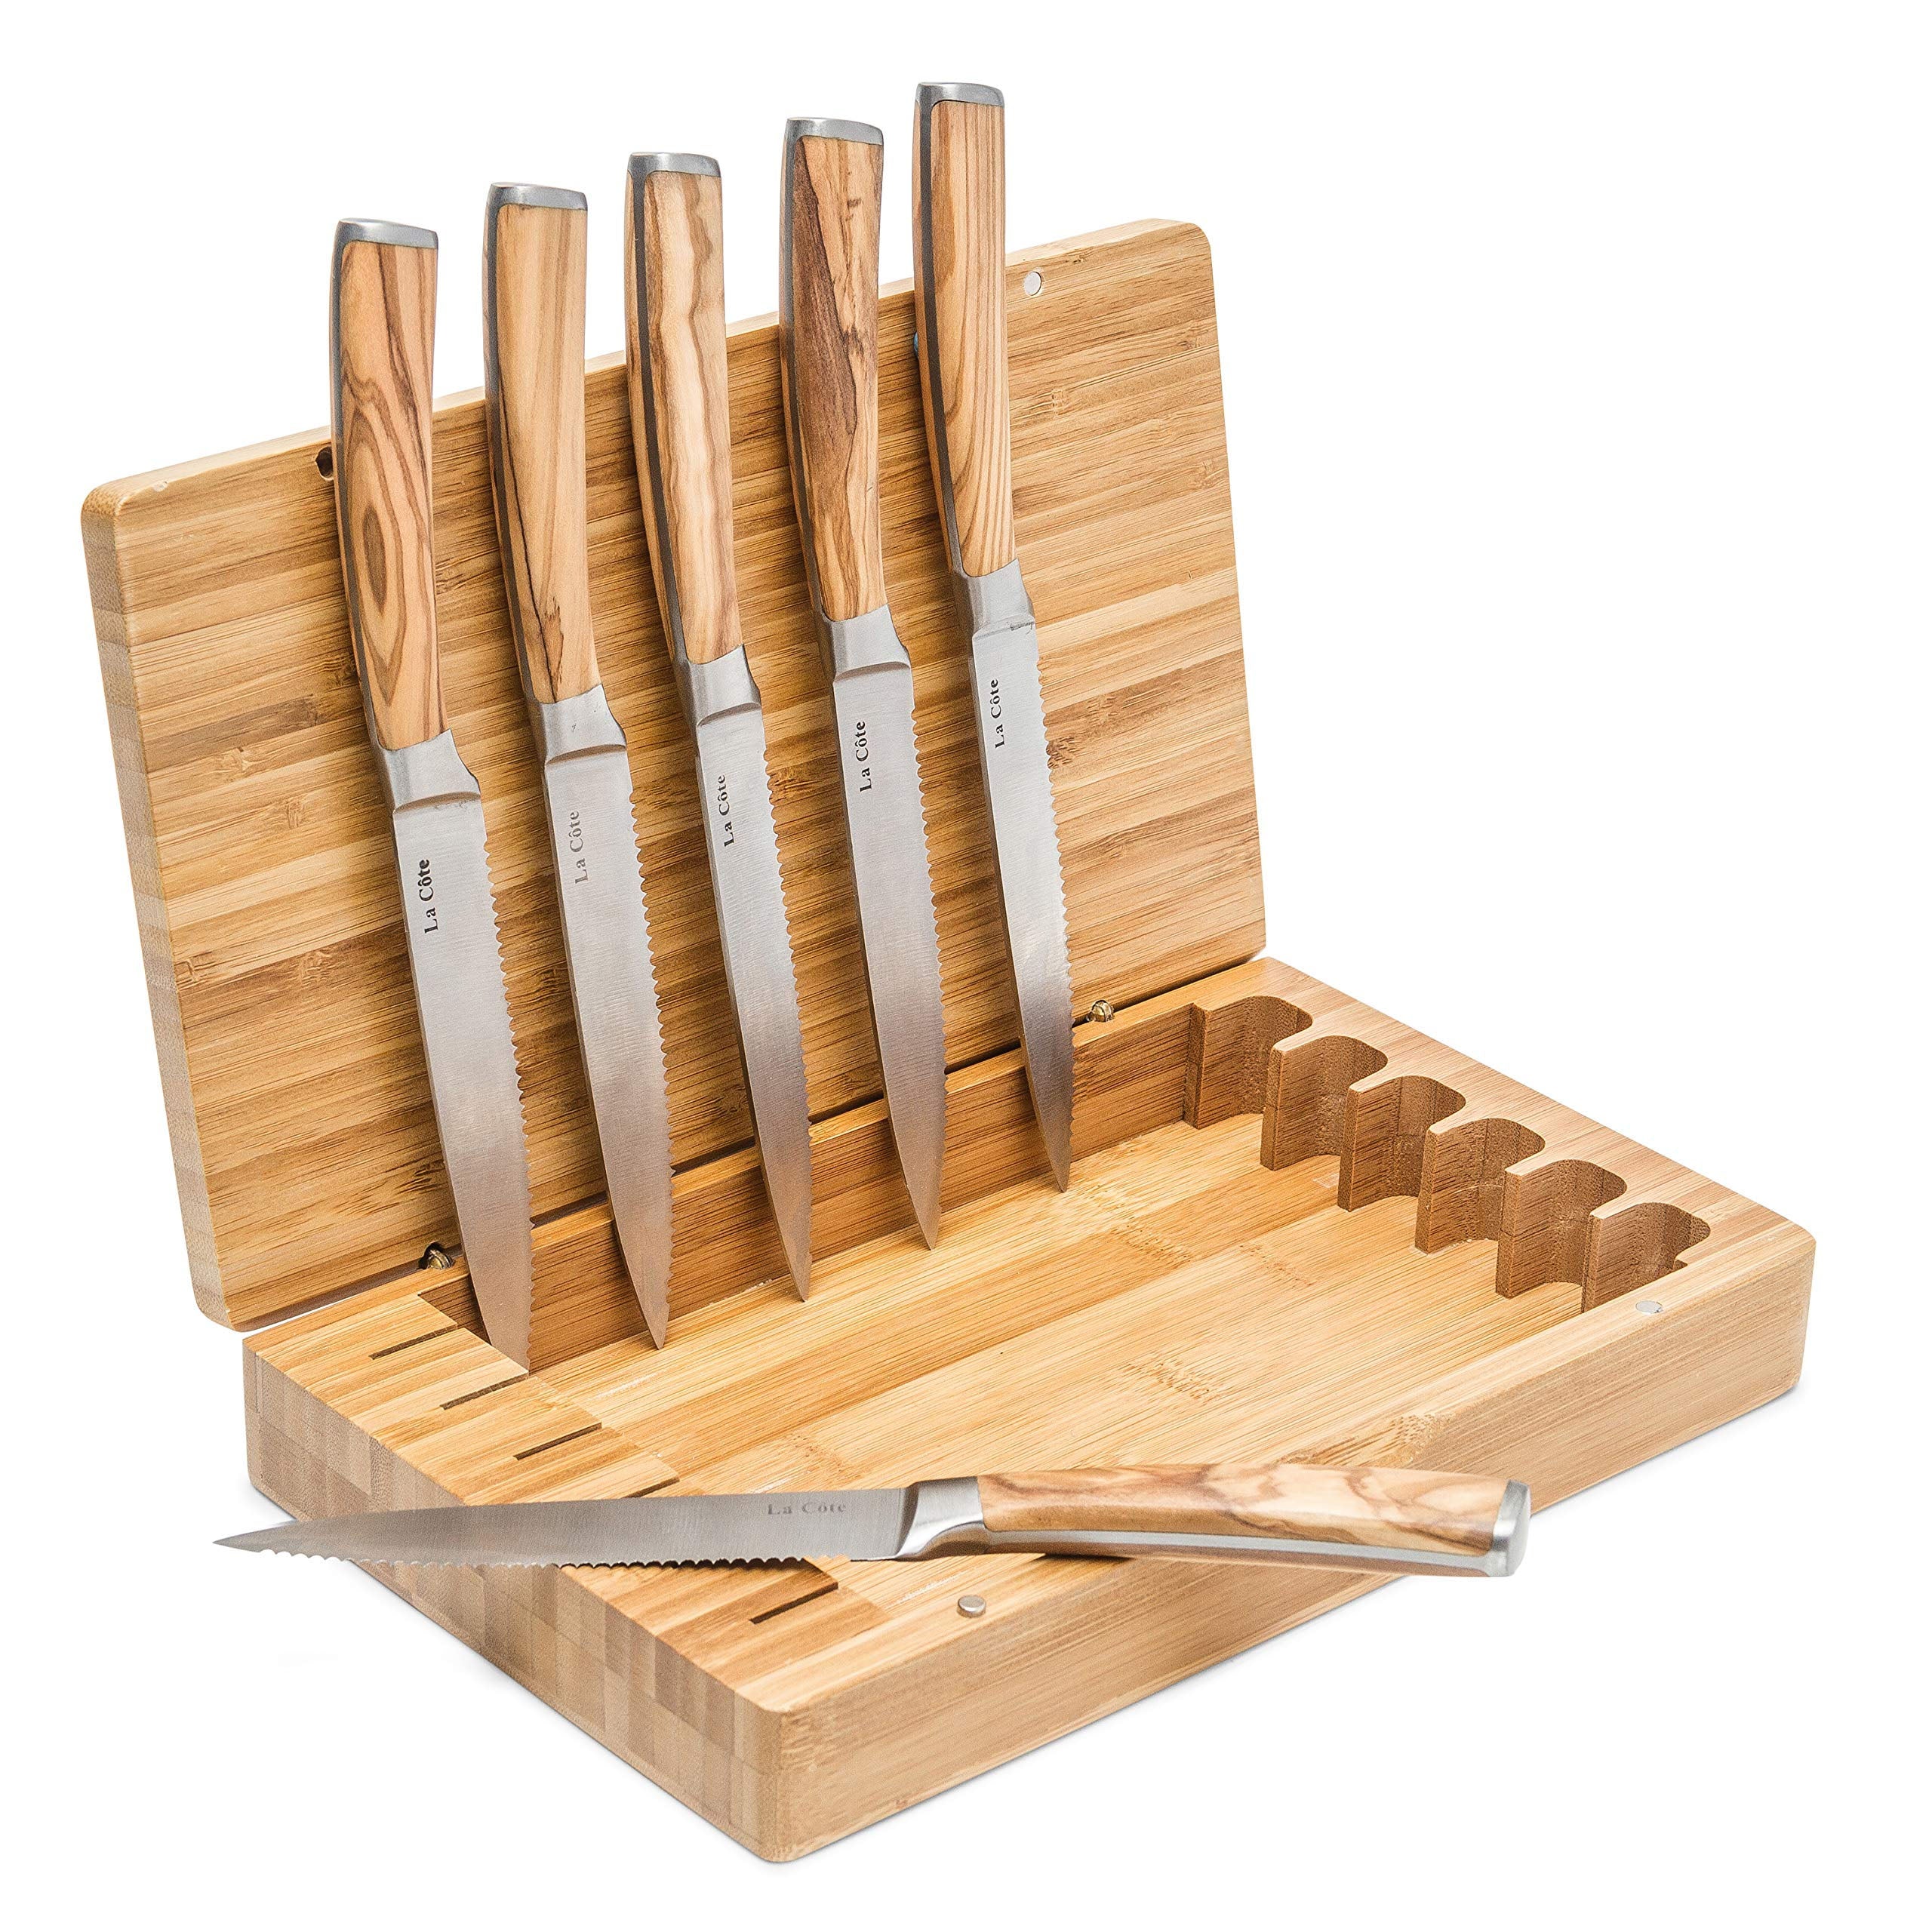 La Cote 6 Piece Steak Knives Set Japanese Stainless Steel Olive Wood Handle In Bamboo Storage Box (Olive Wood)